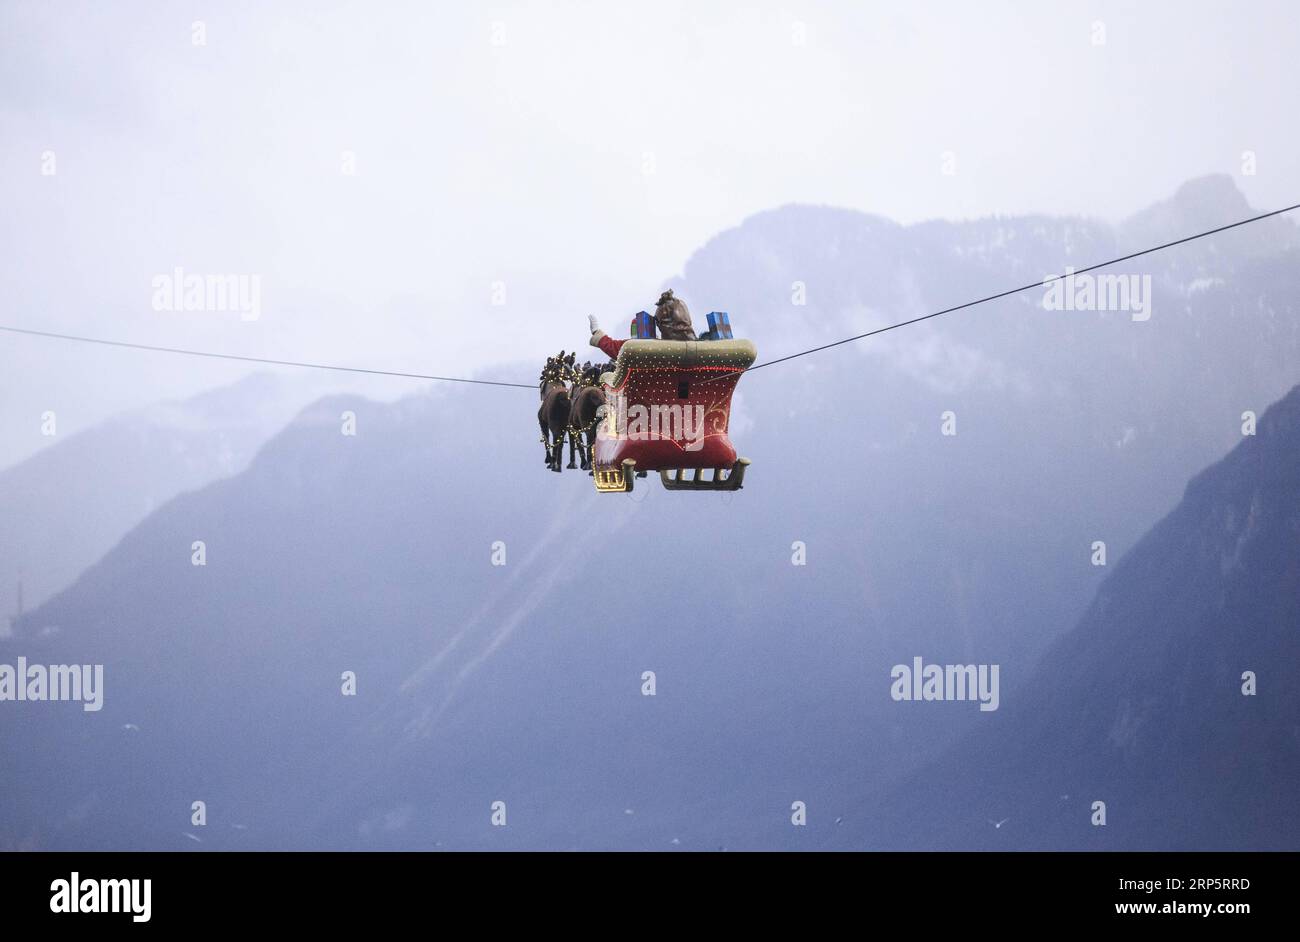 (181222) -- MONTREUX (SWITZERLAND), Dec. 22, 2018 -- A Santa Claus waves to the crowd from his flying sleigh drawn by reindeers over Lake Leman at sunset in Montreux, Switzerland, on Dec. 22, 2018. The flying Santa Claus stunt show is part of promotional activities by the Christmas market in Montreux, which is one of the most famous and biggest markets of its kind in Switzerland. ) SWITZERLAND-MONTREUX-SANTA CLAUS-FLYING SLEIGH NiexXiaoyang PUBLICATIONxNOTxINxCHN Stock Photo